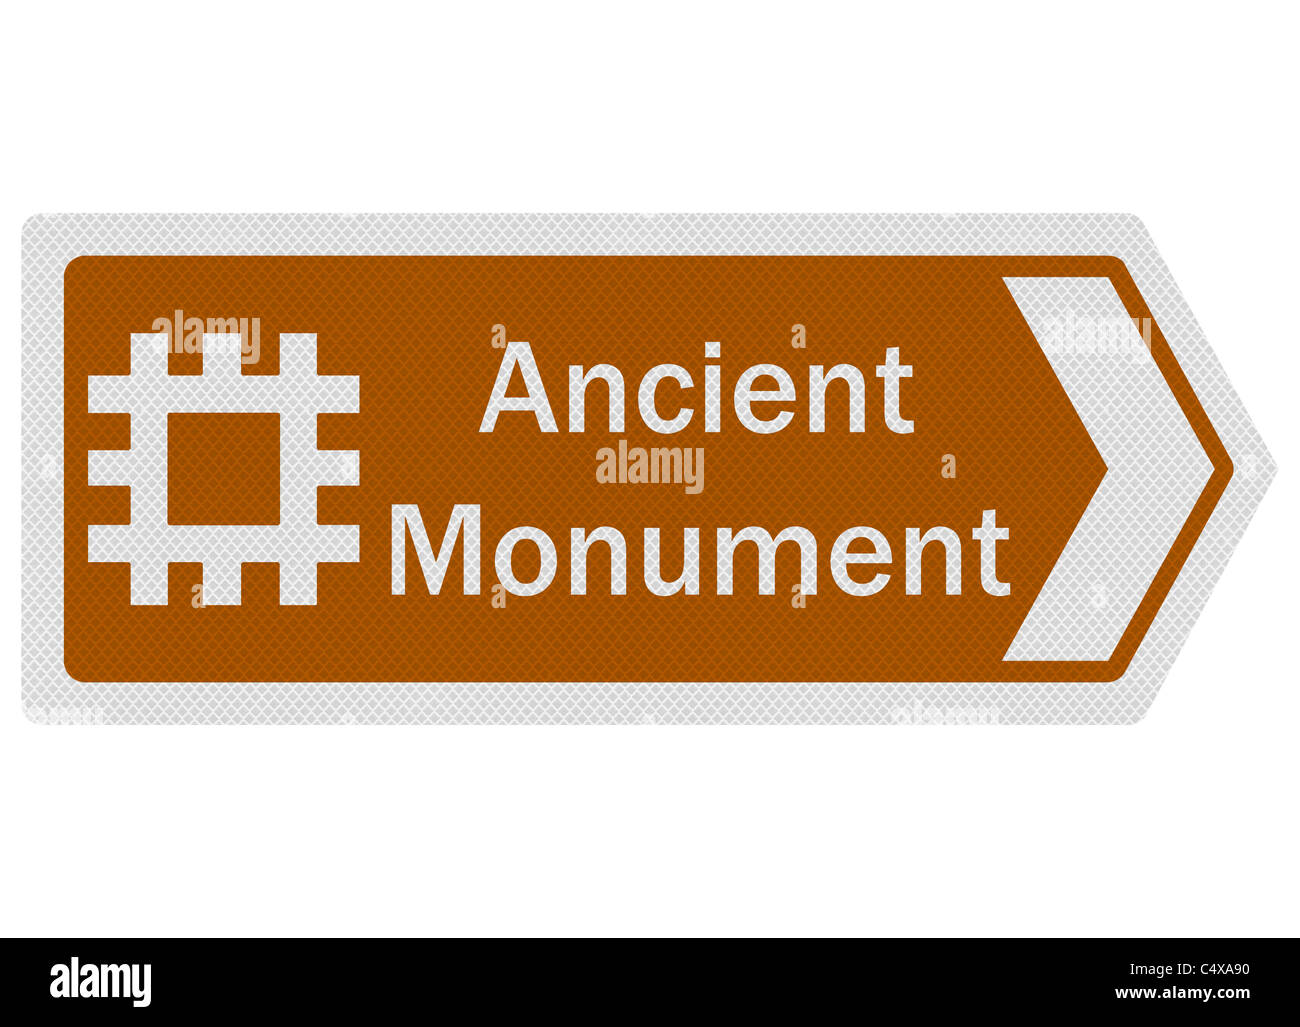 Tourist information series: photo-realistic metallic, reflective 'Ancient Monument' sign, isolated on white Stock Photo